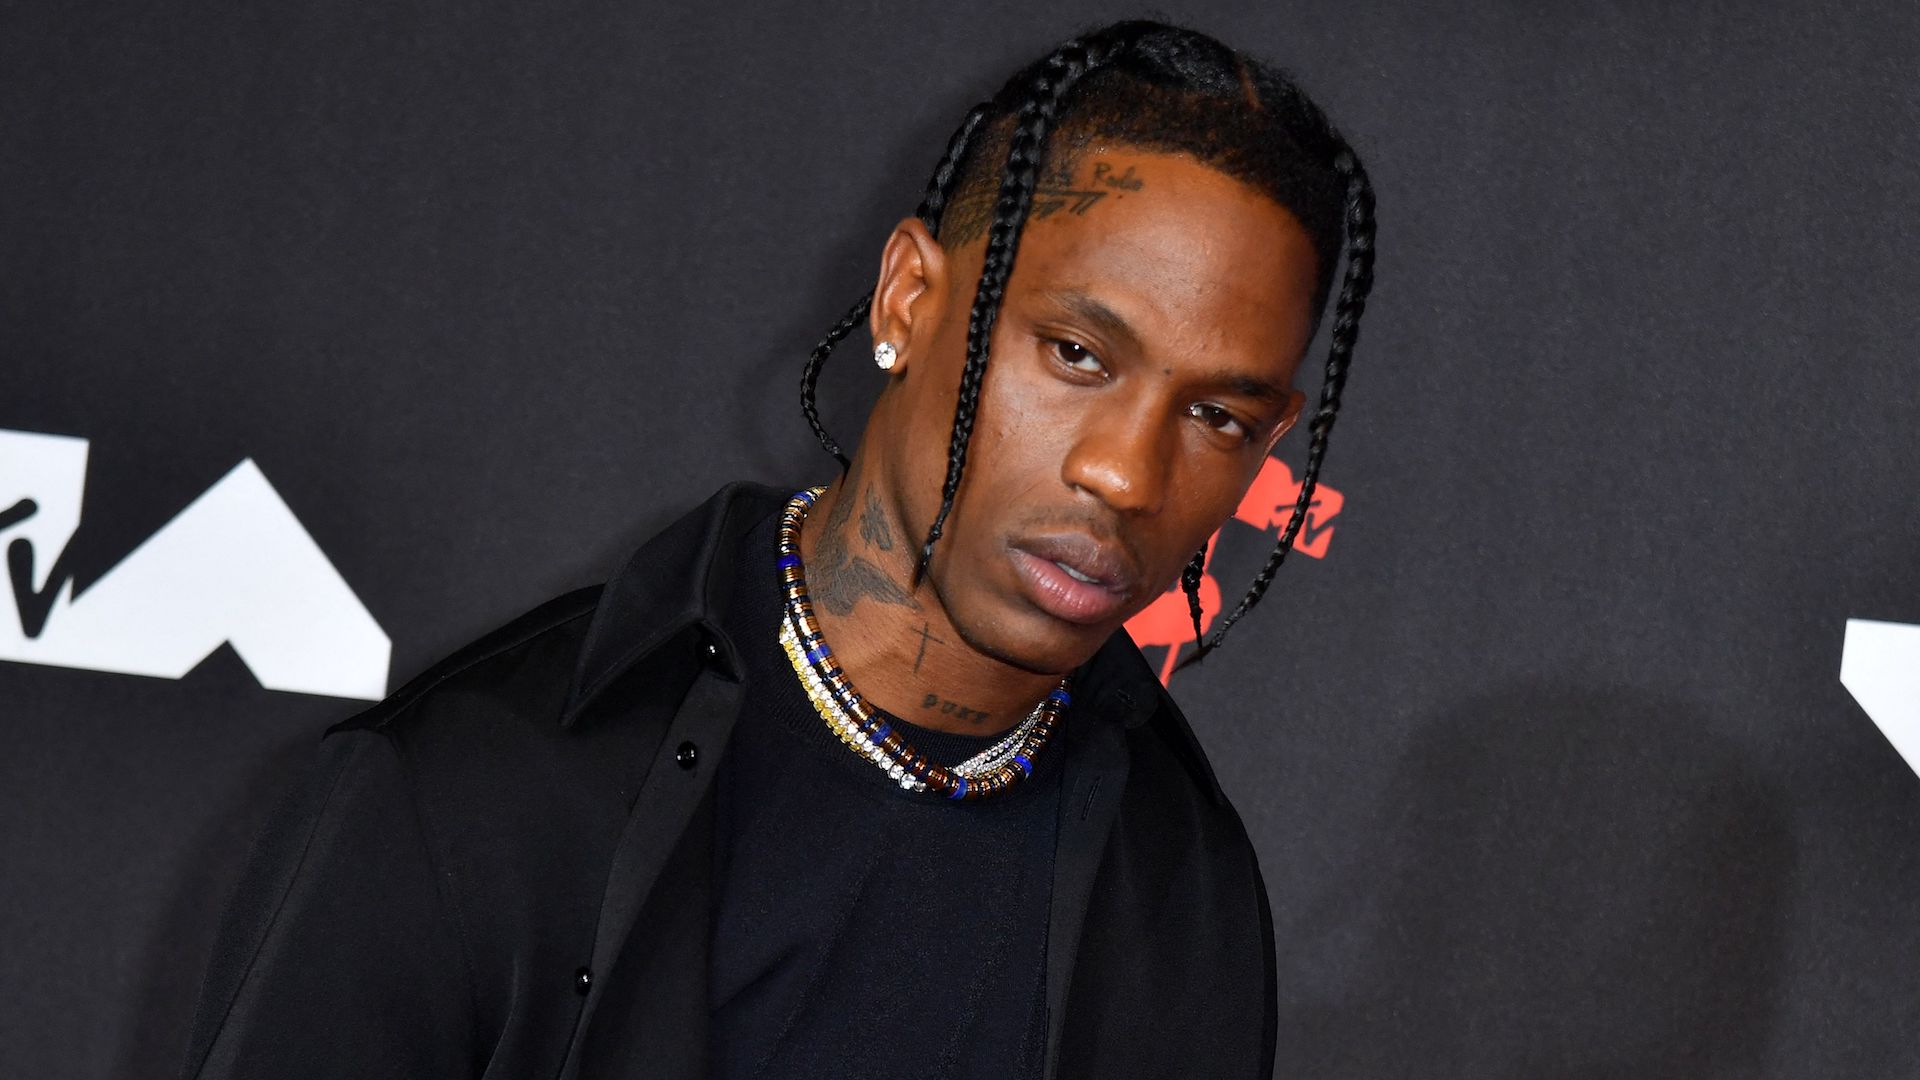 Travis Scott Went to Dave & Buster's After Astroworld Festival